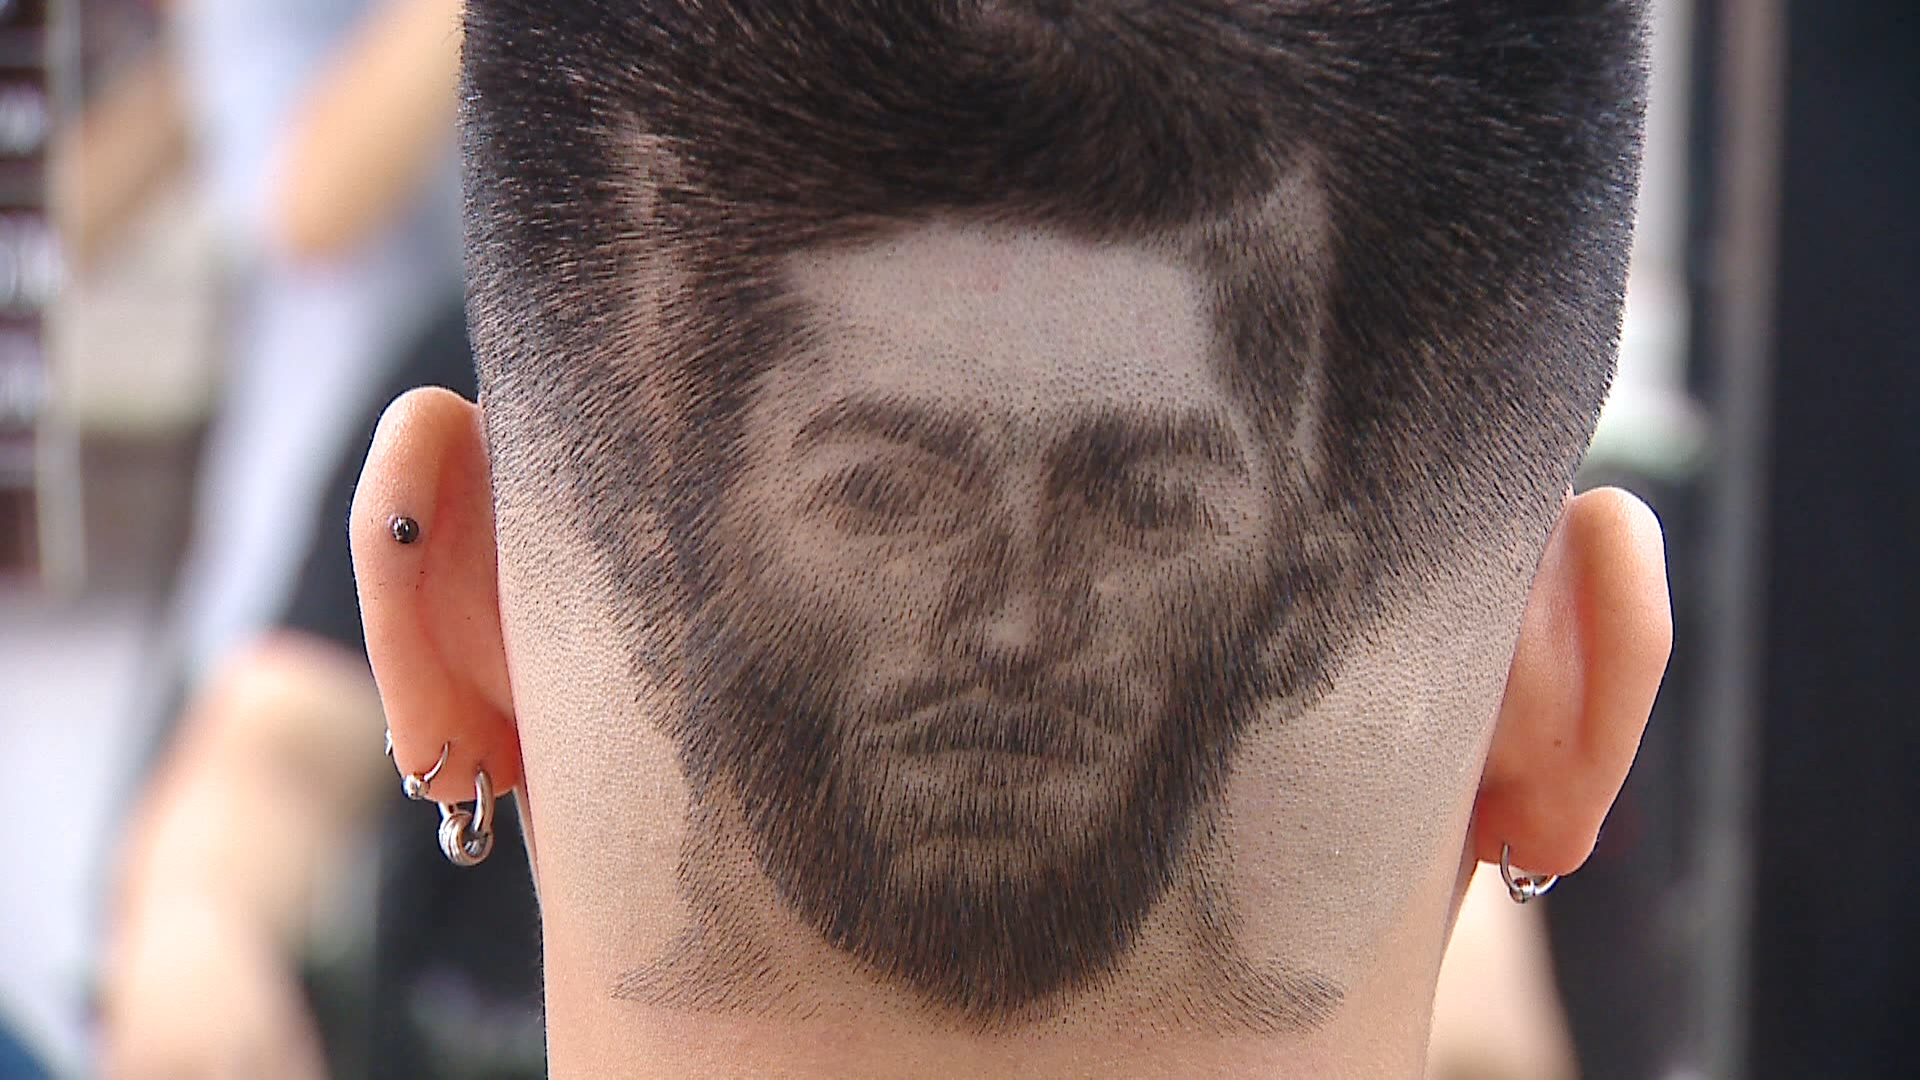 Fans enjoy World Cup with special haircuts | Culture - Sports | Vietnam+  (VietnamPlus)